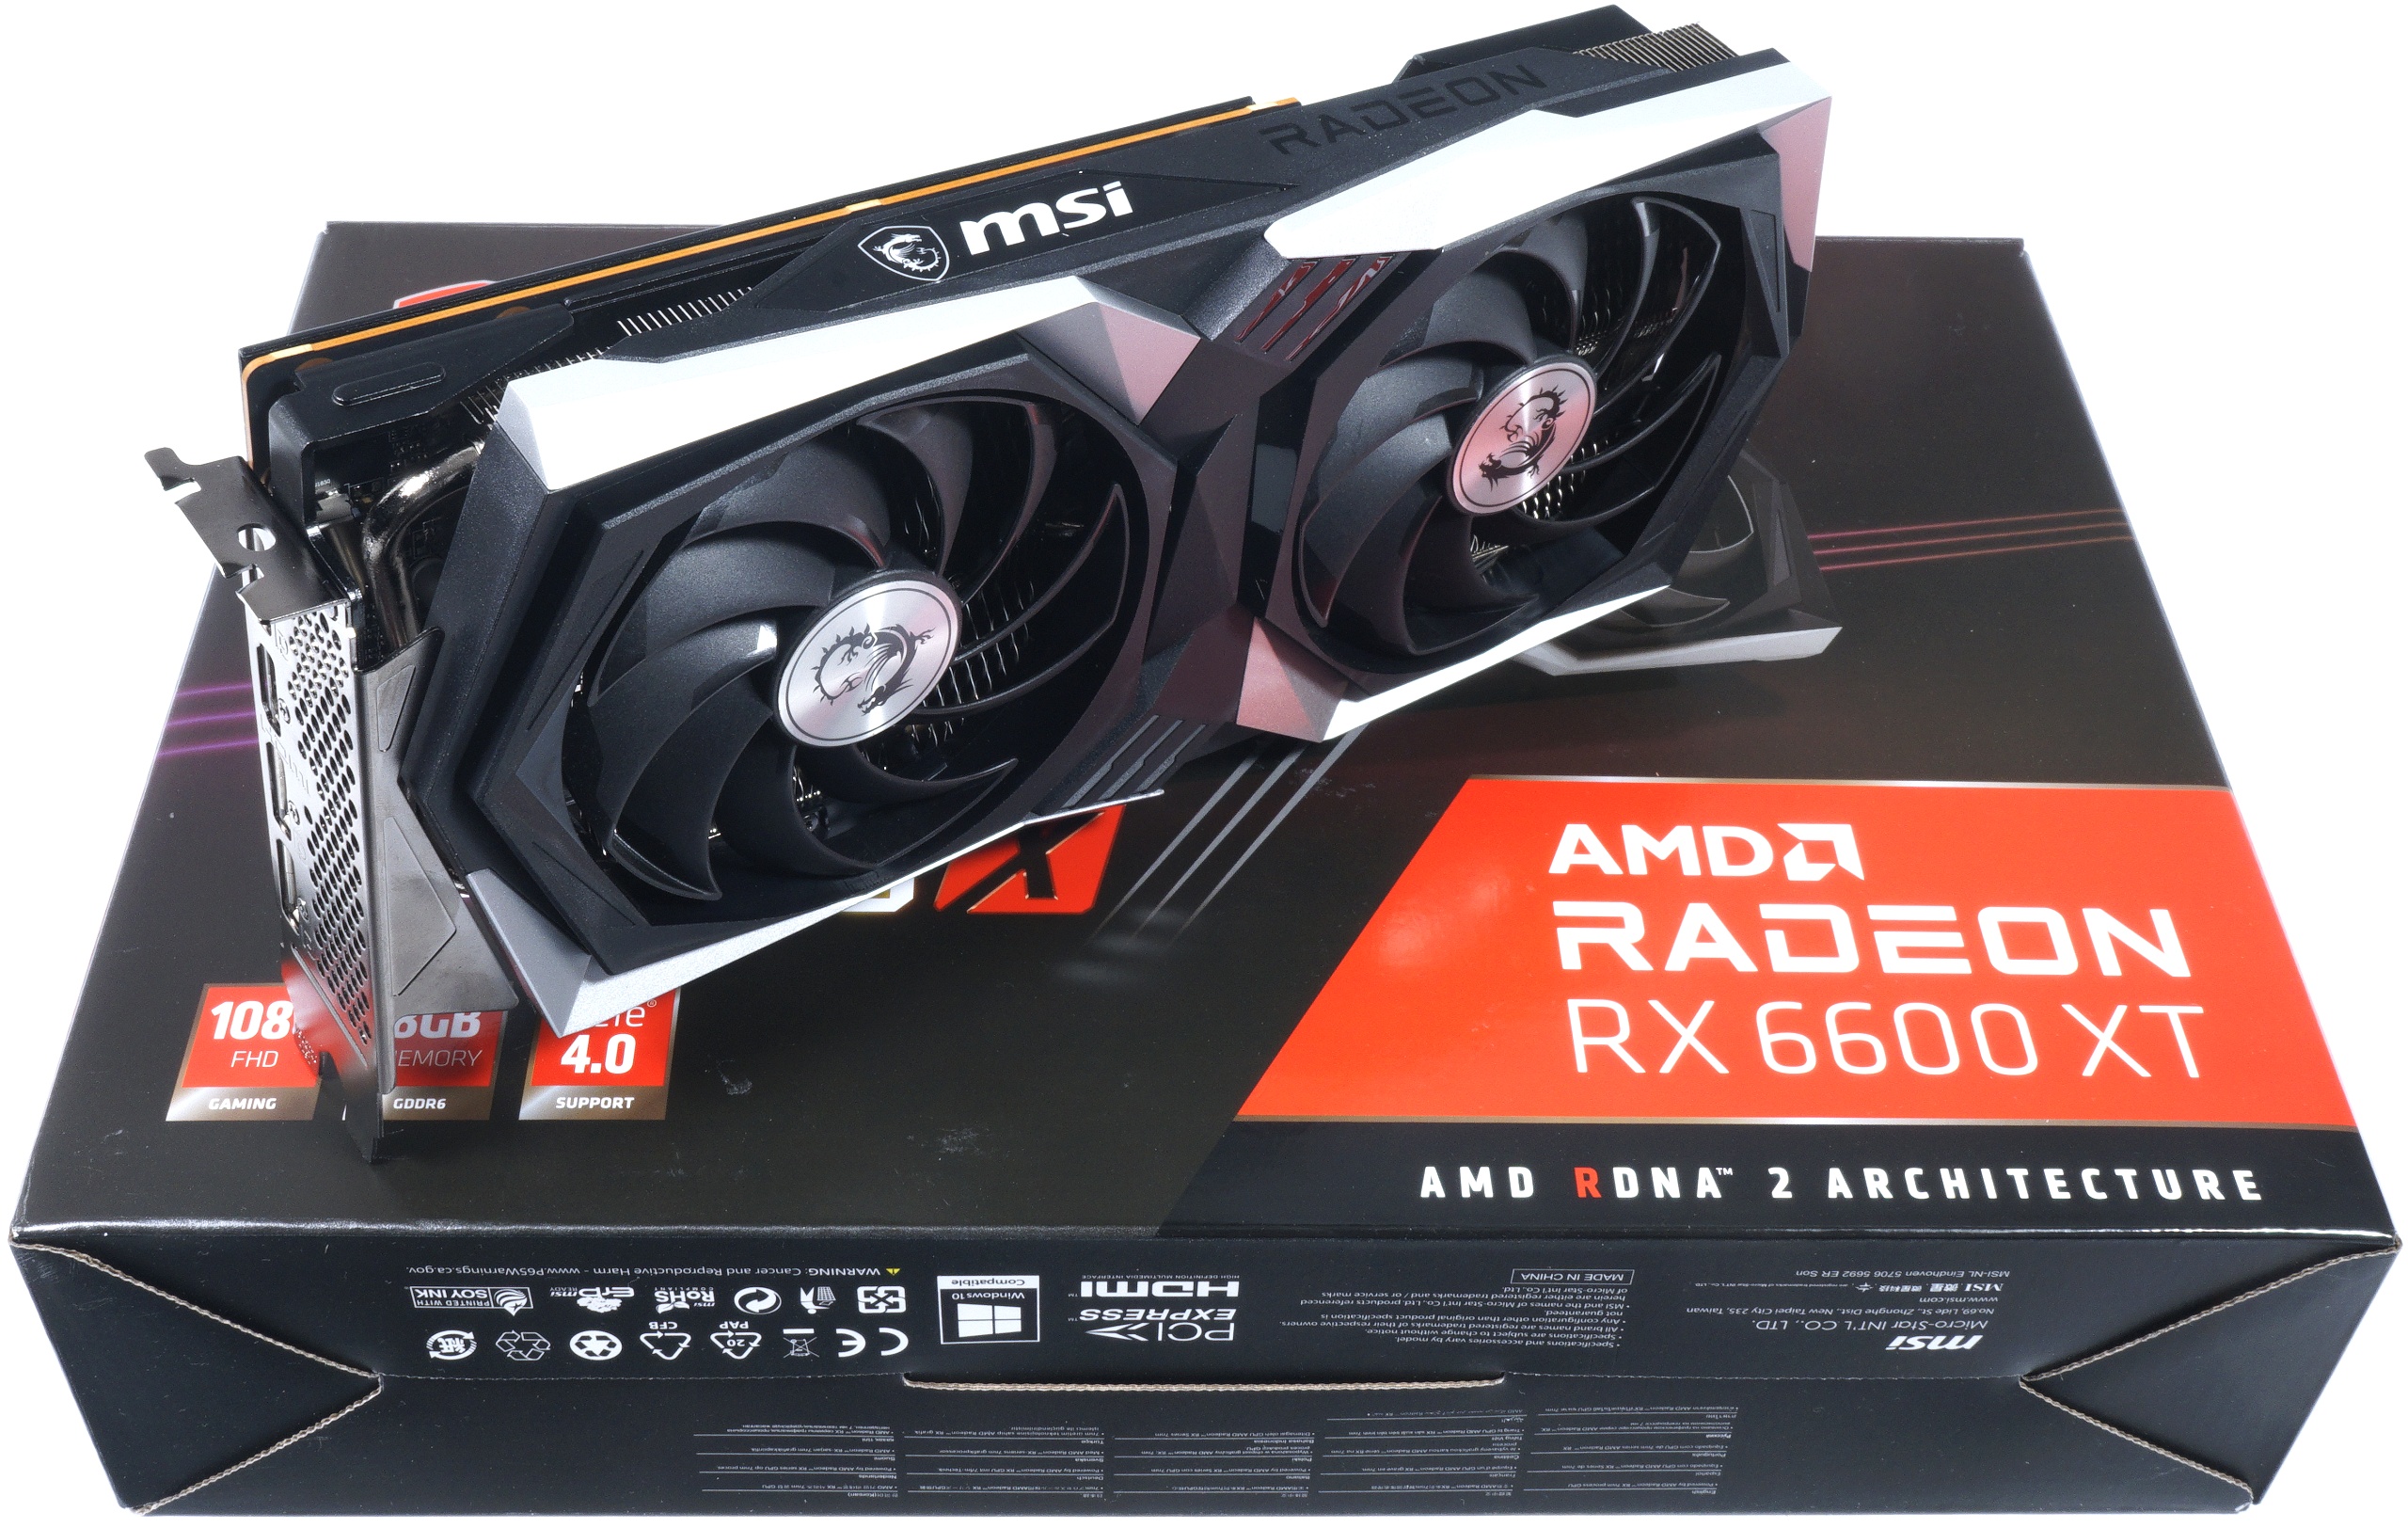 AMD Radeon RX 6600 XT with 8 lanes on PCIe 3.0 and without